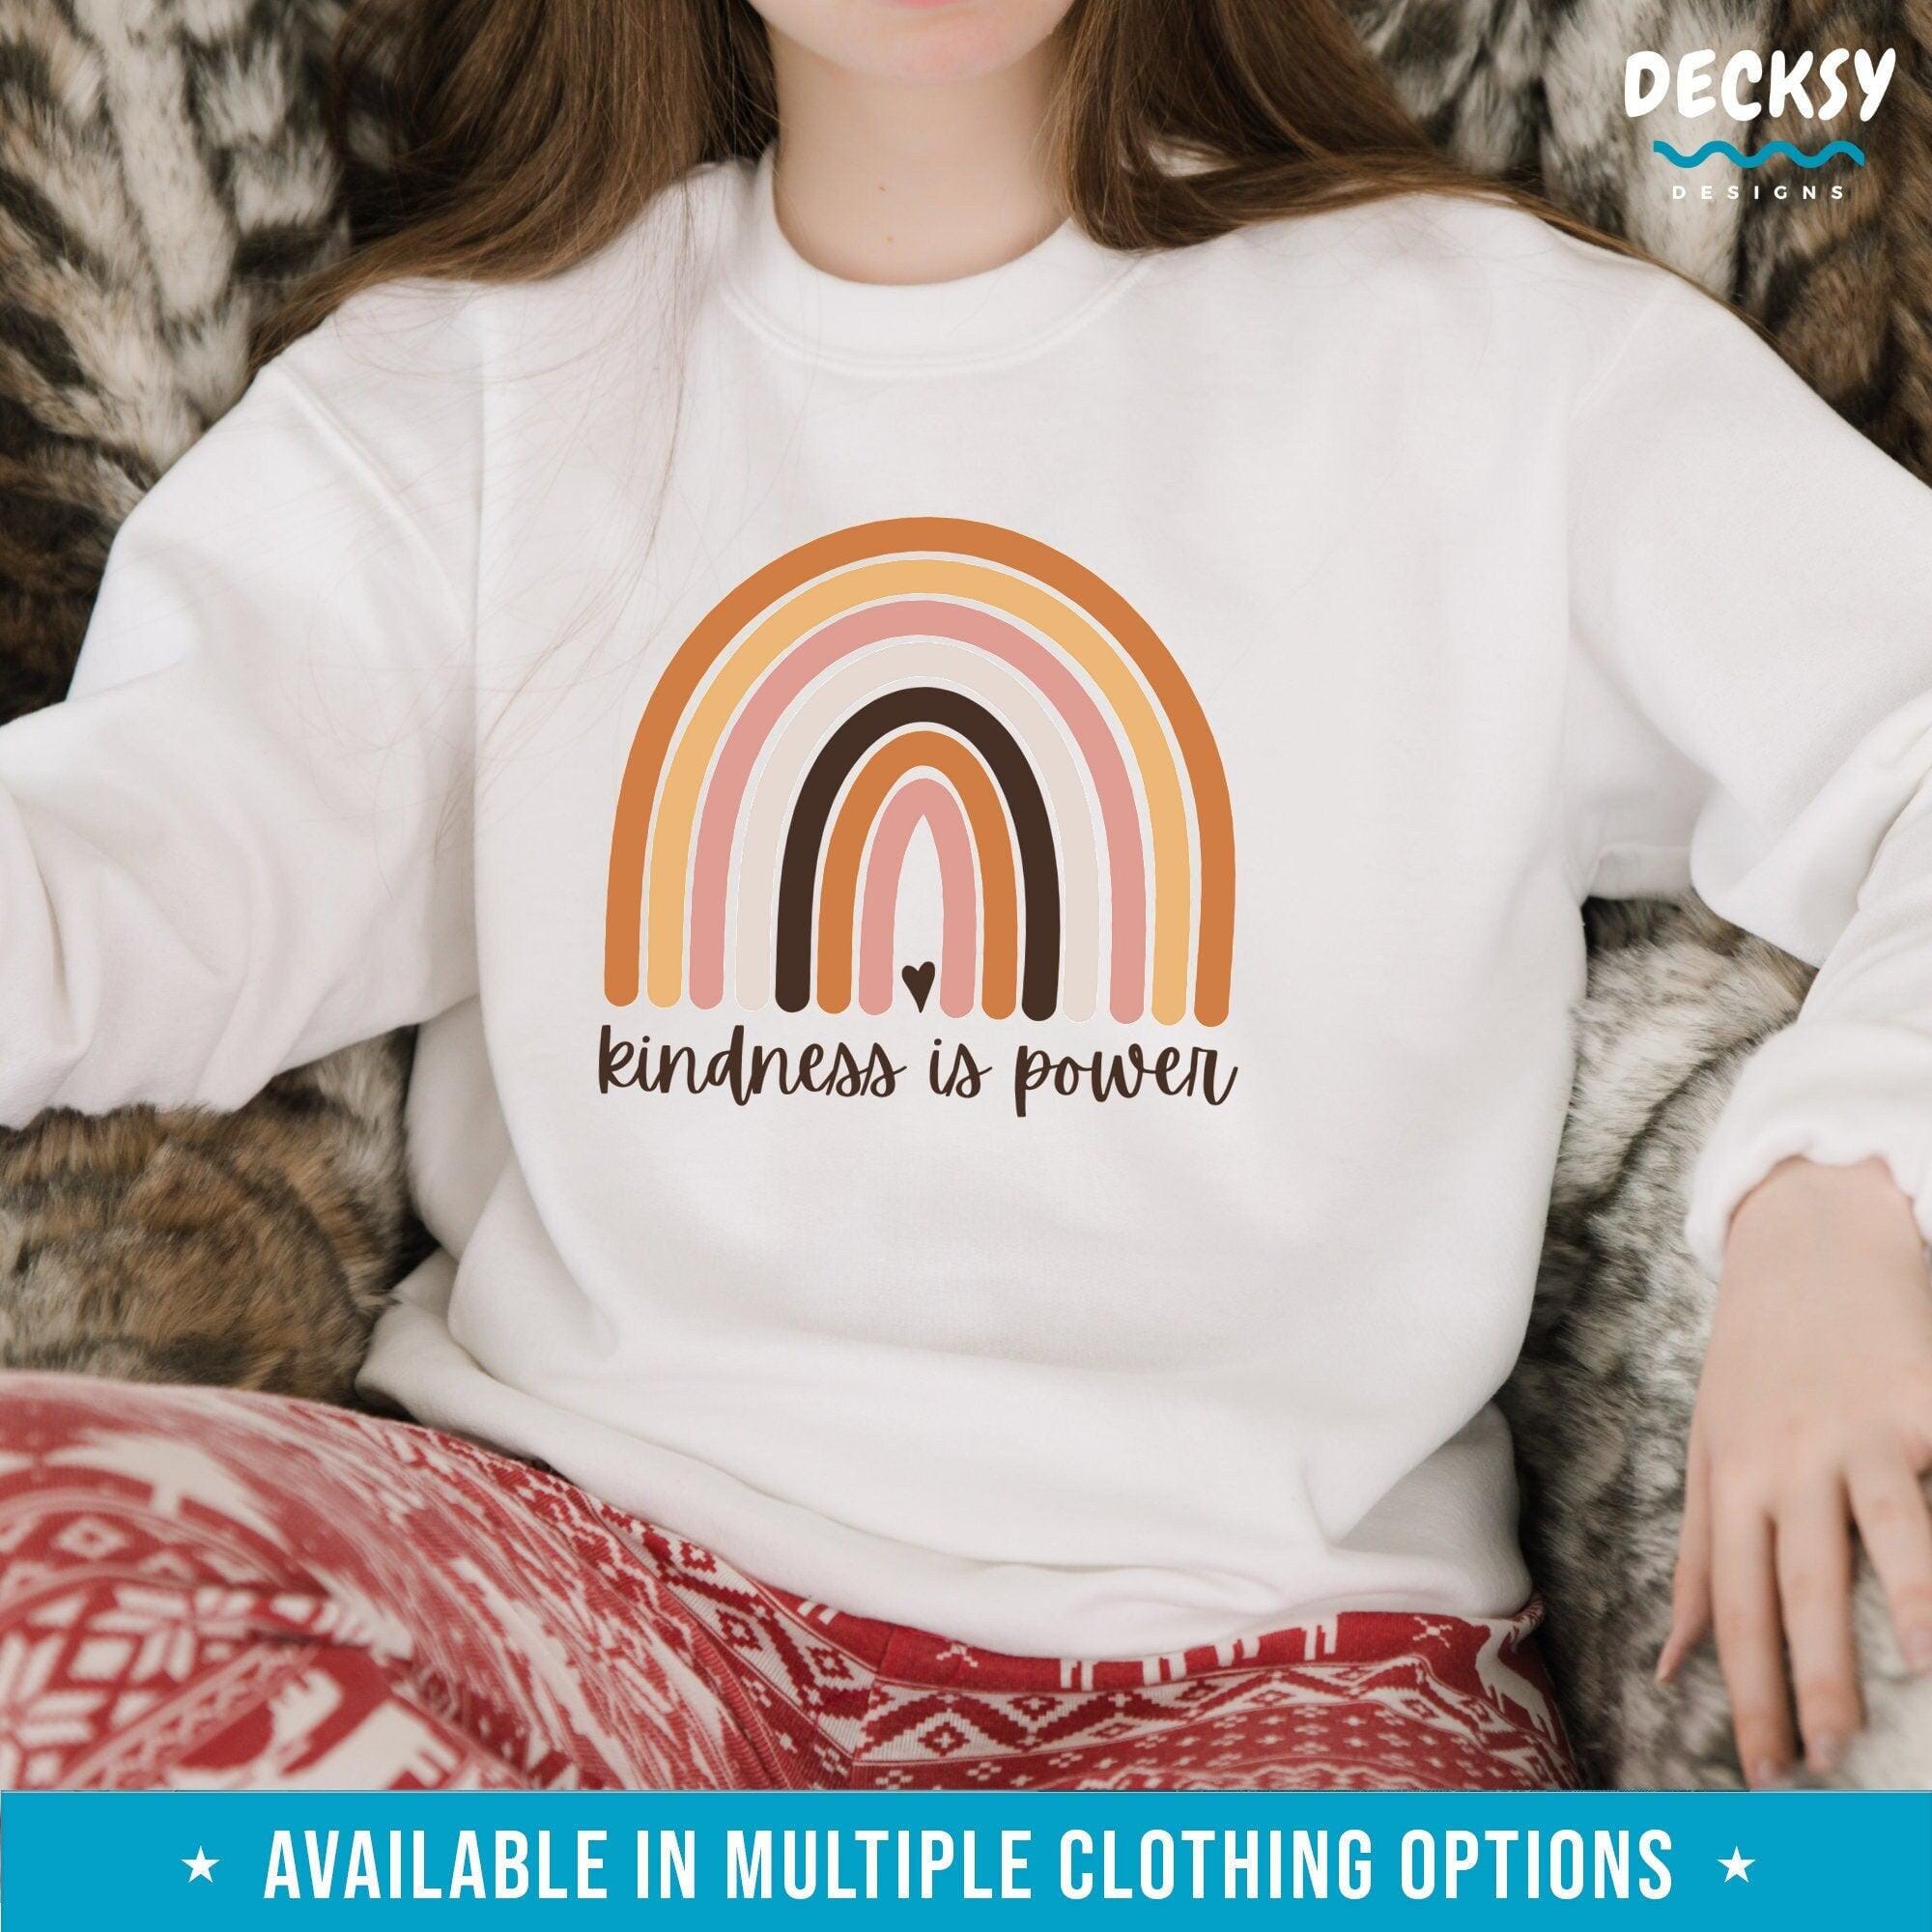 Kindness Shirt, Cute Rainbow Gift-Clothing:Gender-Neutral Adult Clothing:Tops & Tees:T-shirts:Graphic Tees-DecksyDesigns